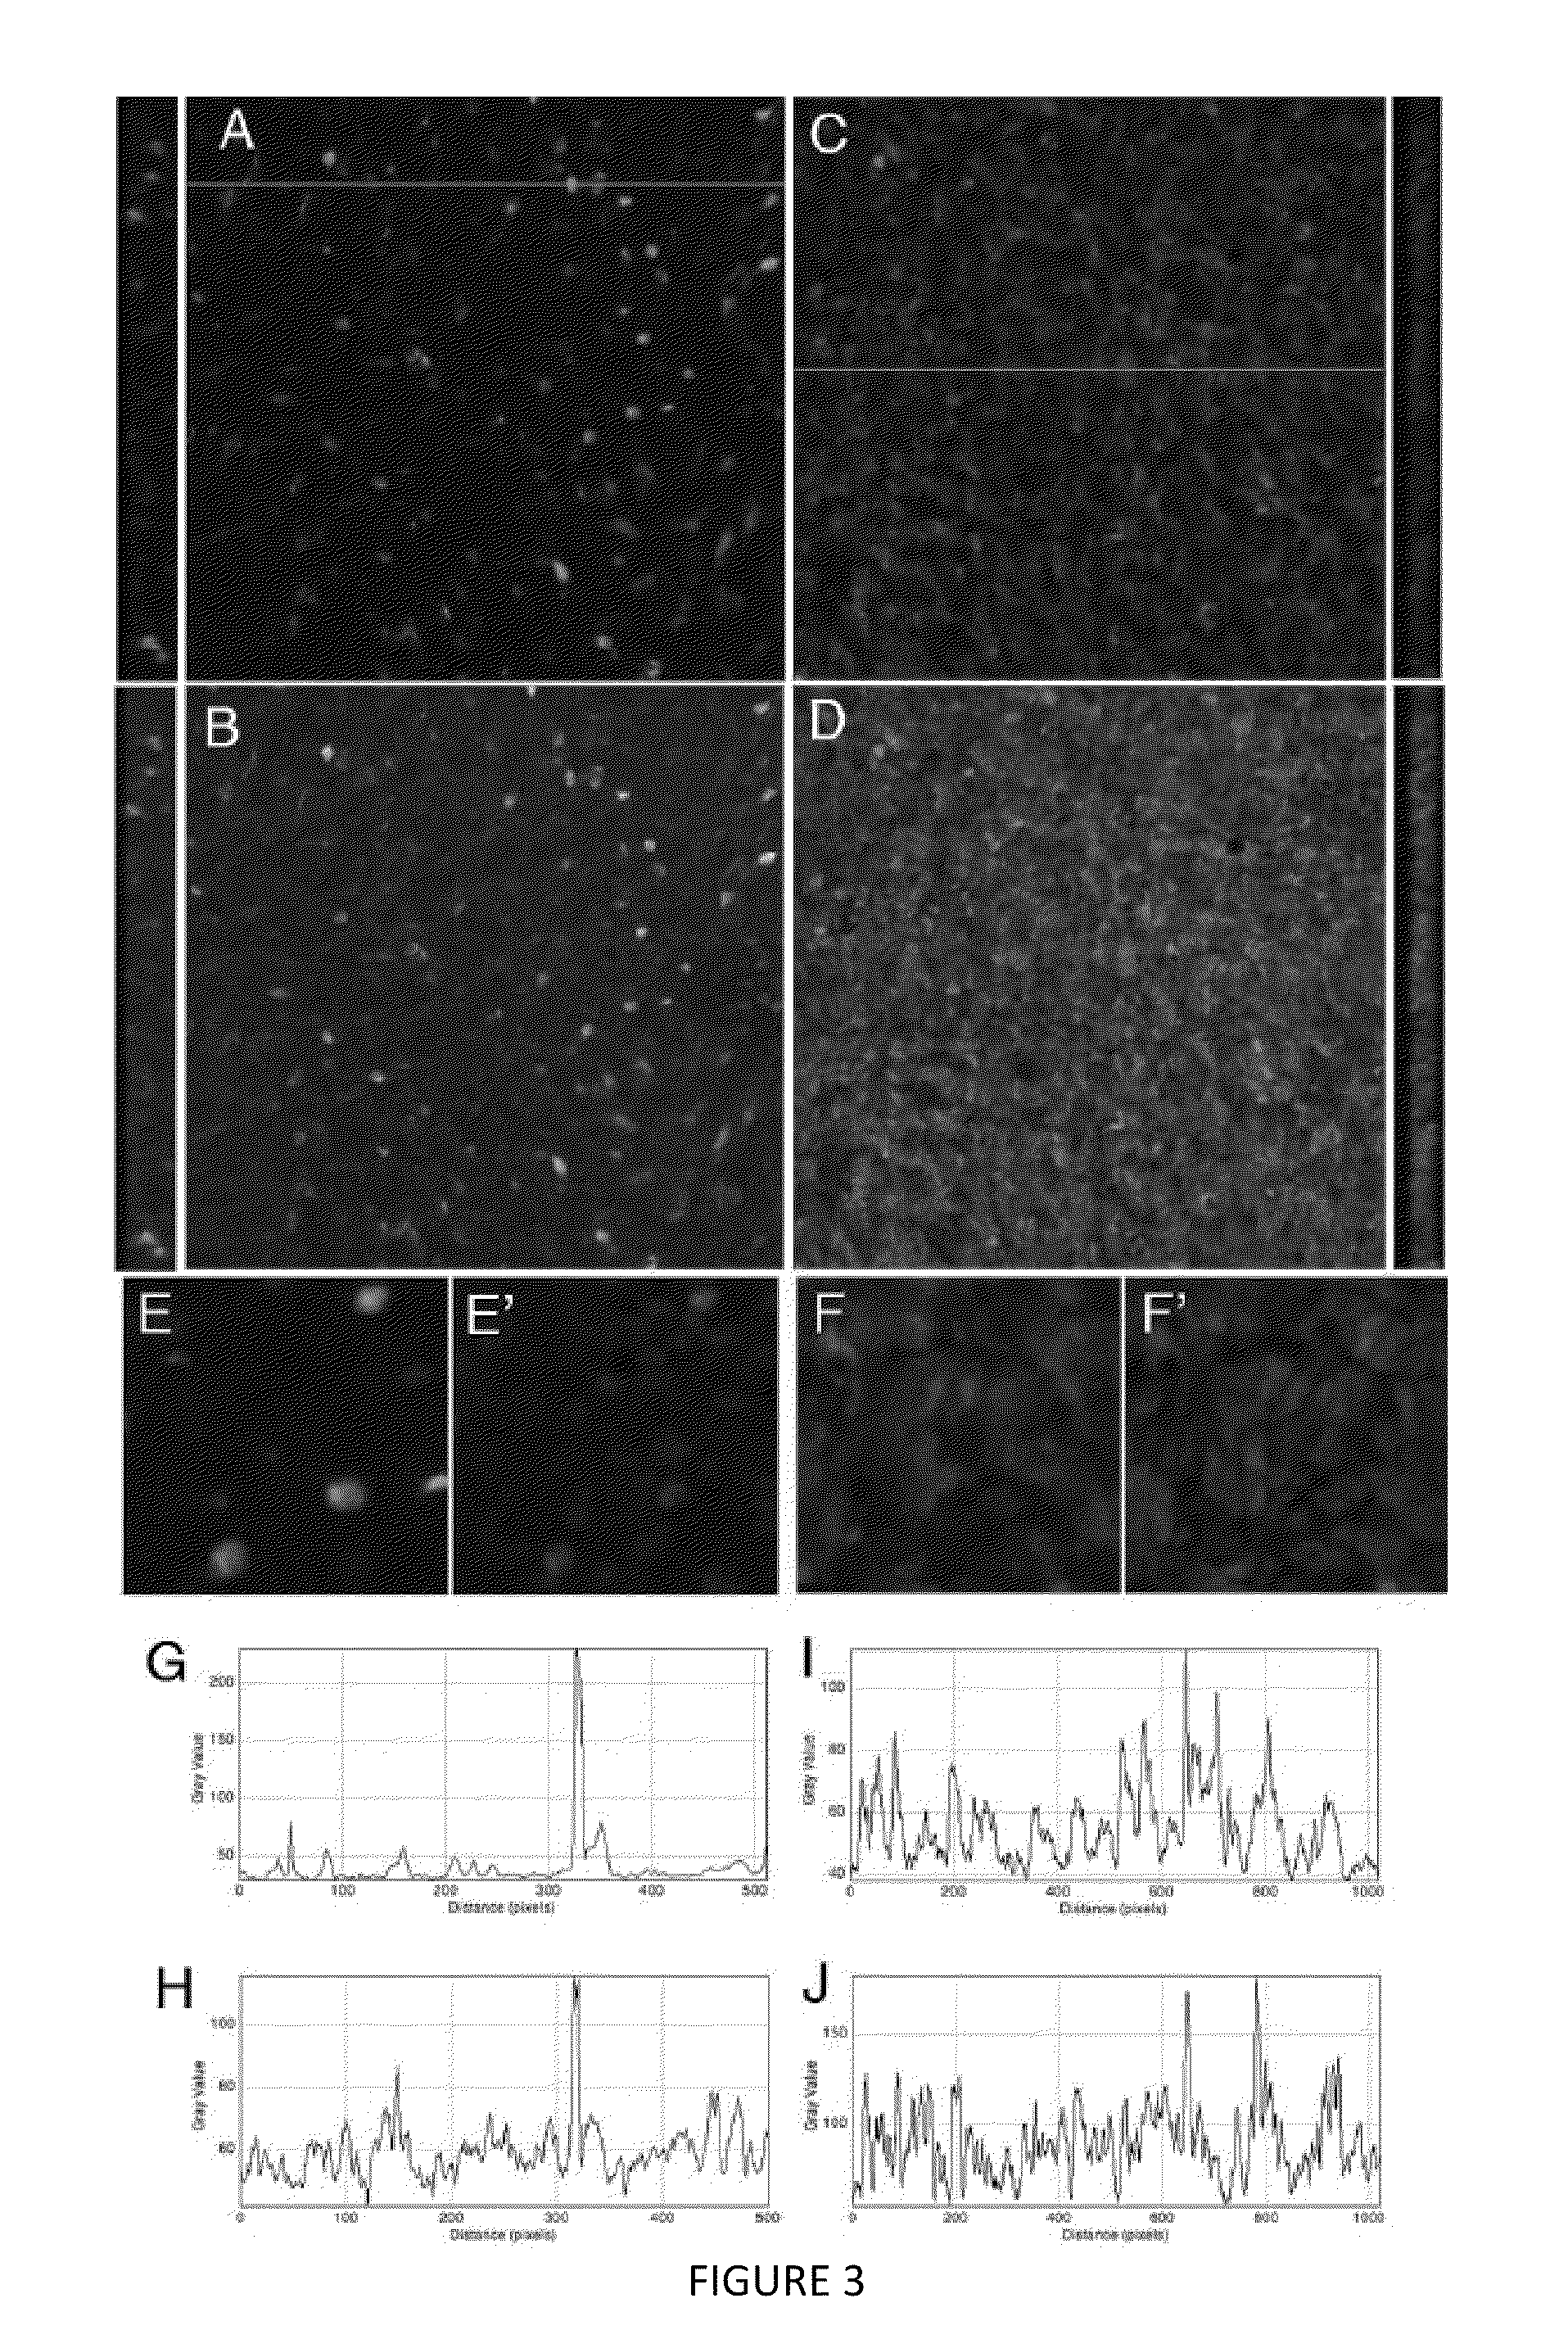 Compositions and methods for transfection of RNA and controlled stabilization of transfected RNA